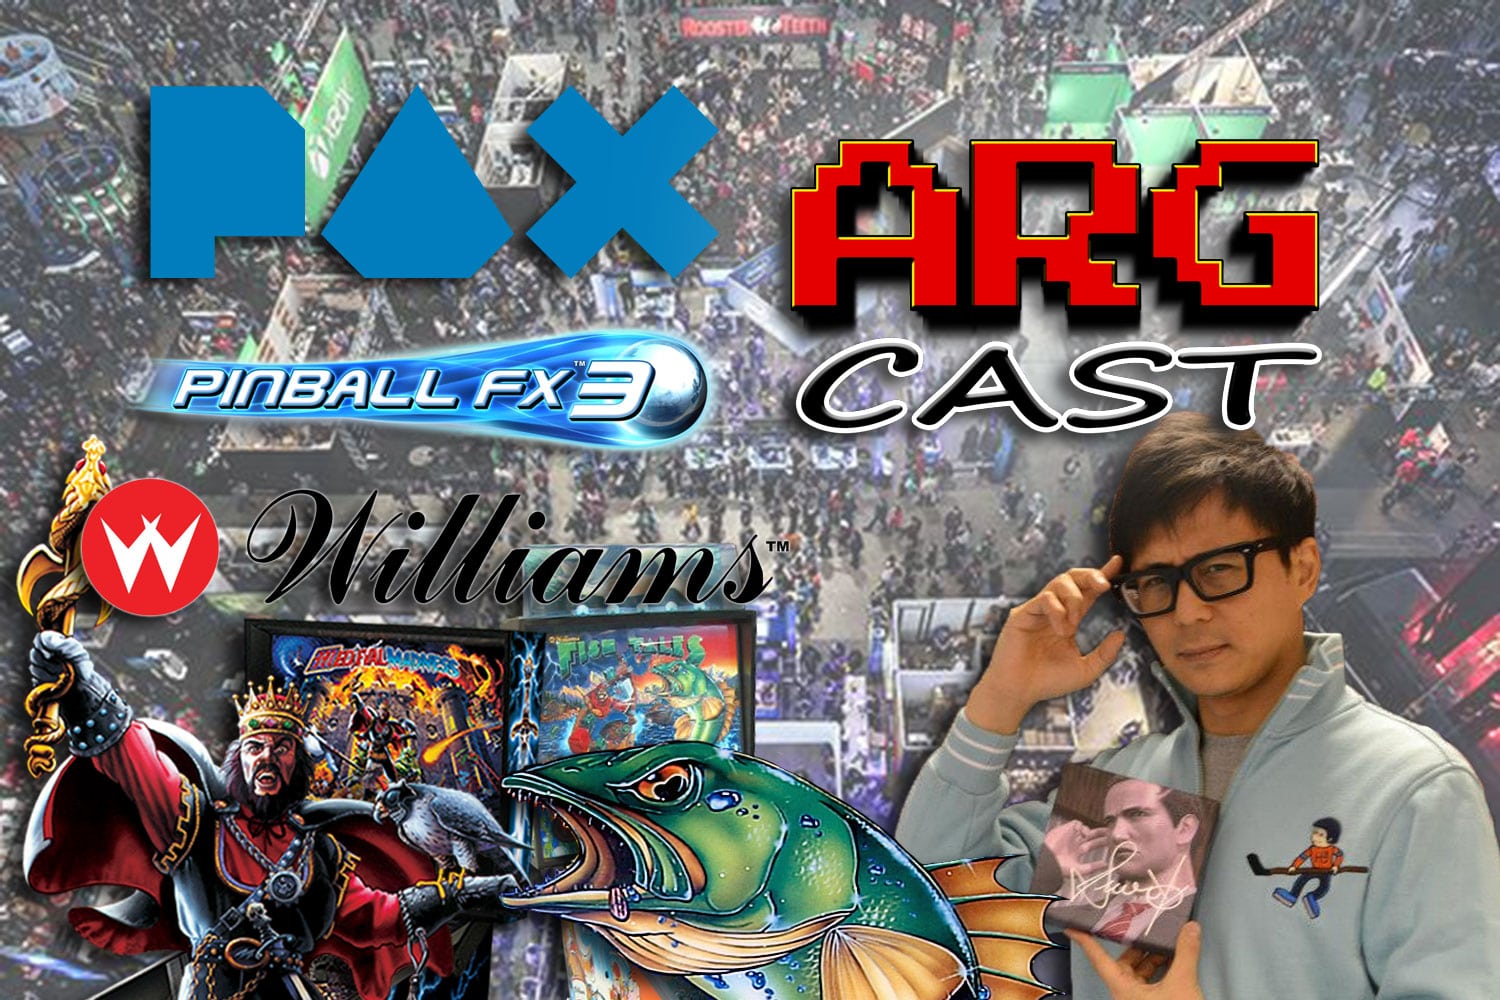 ARGcast #127: PAX West 2018 Interviews and Pinball FX3 with Mel Kirk